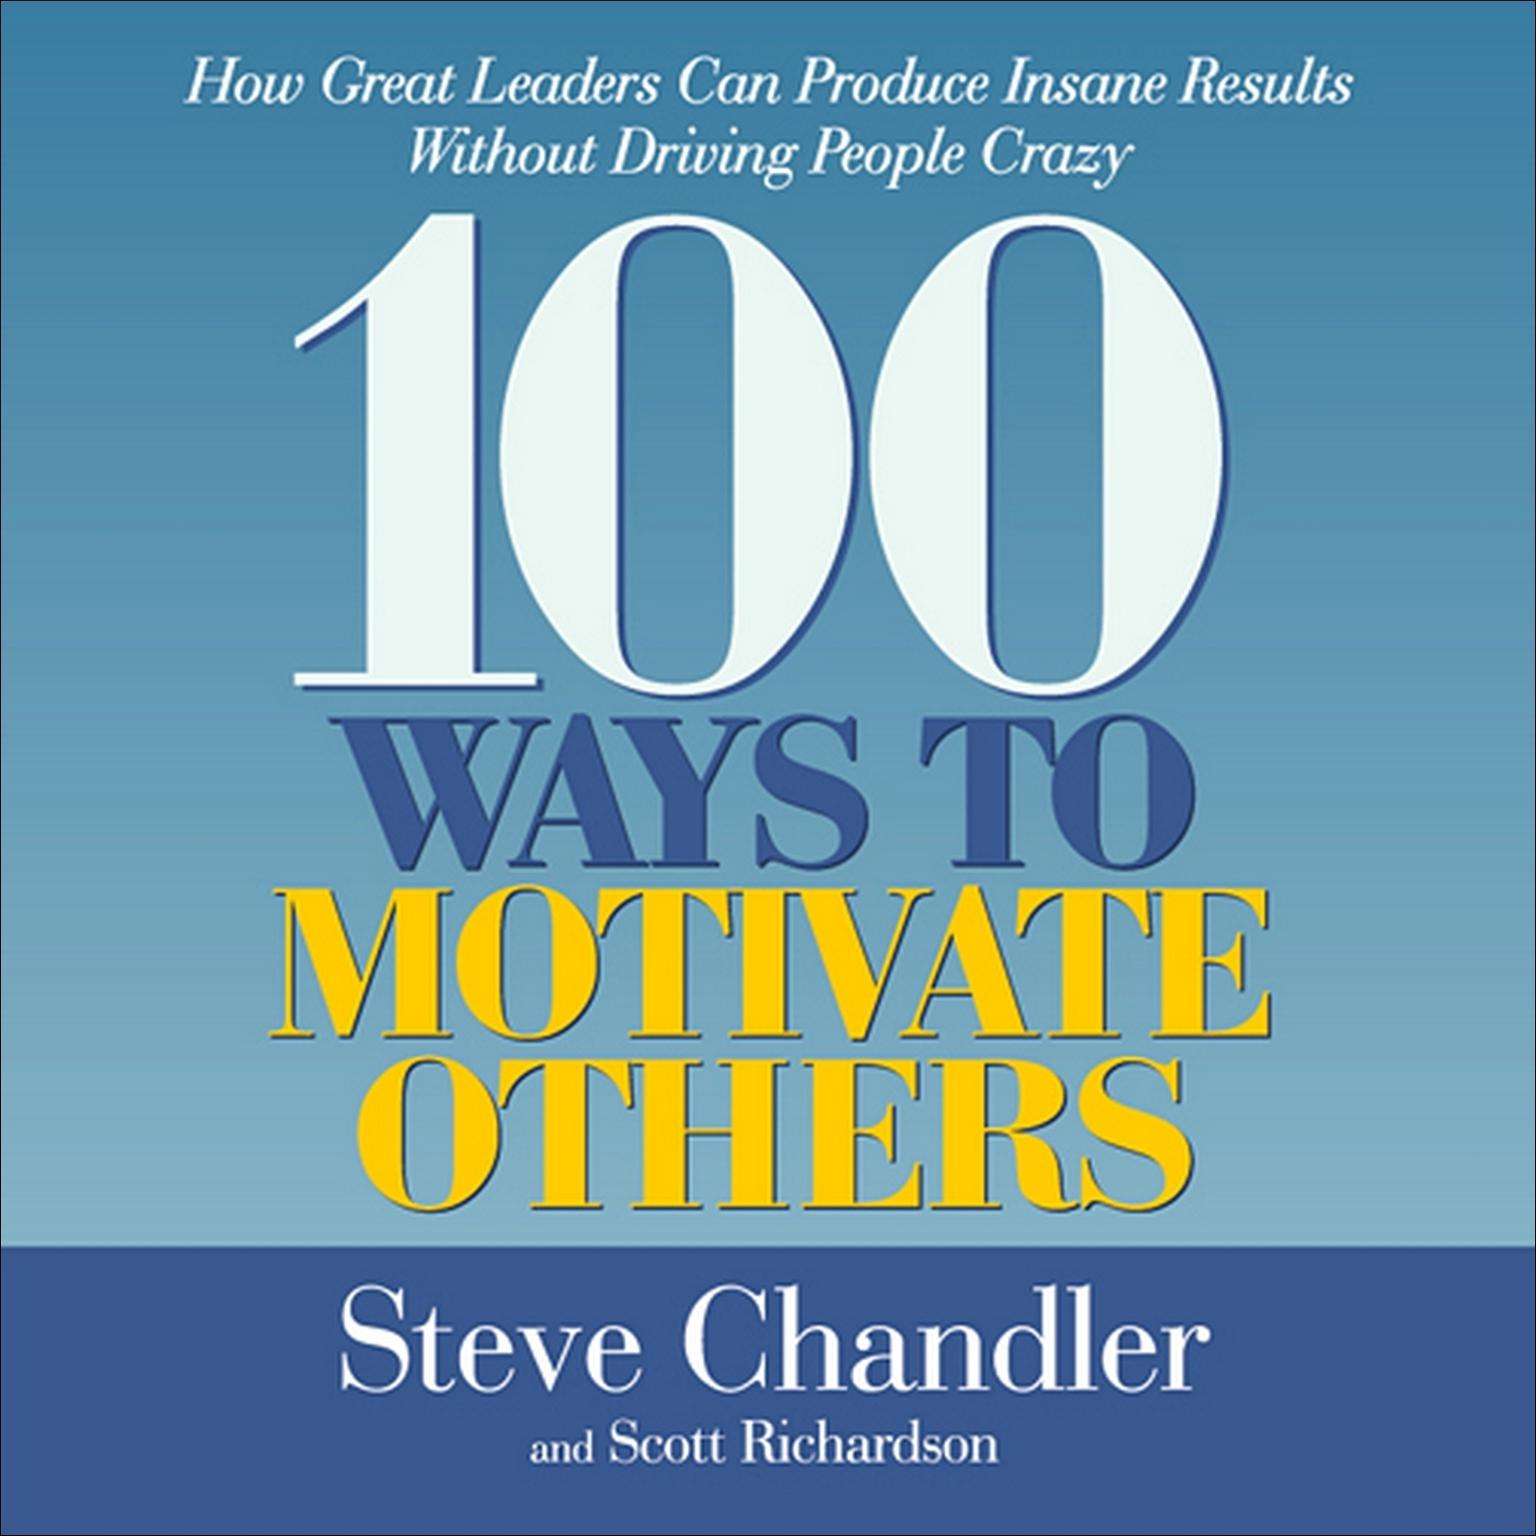 100 Ways to Motivate Others: How Great Leaders Can Produce Insane Results Without Driving People Crazy Audiobook, by Steve Chandler